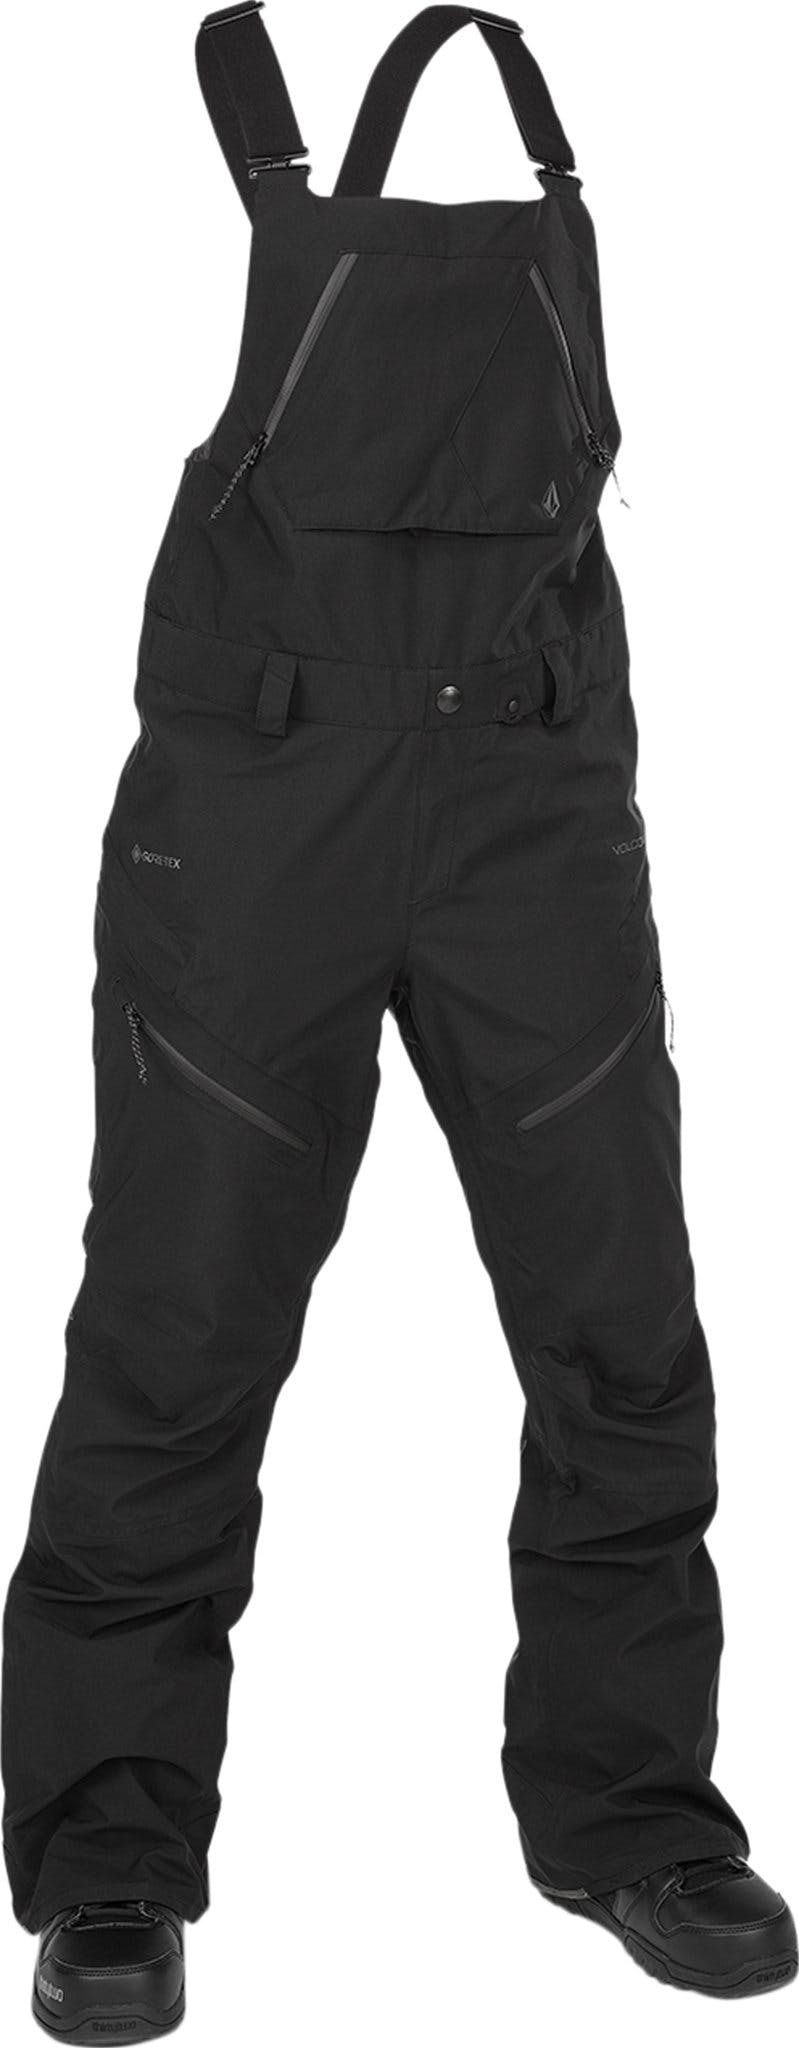 Product image for ELM Stretch GORE-TEX Bib Overall - Women's